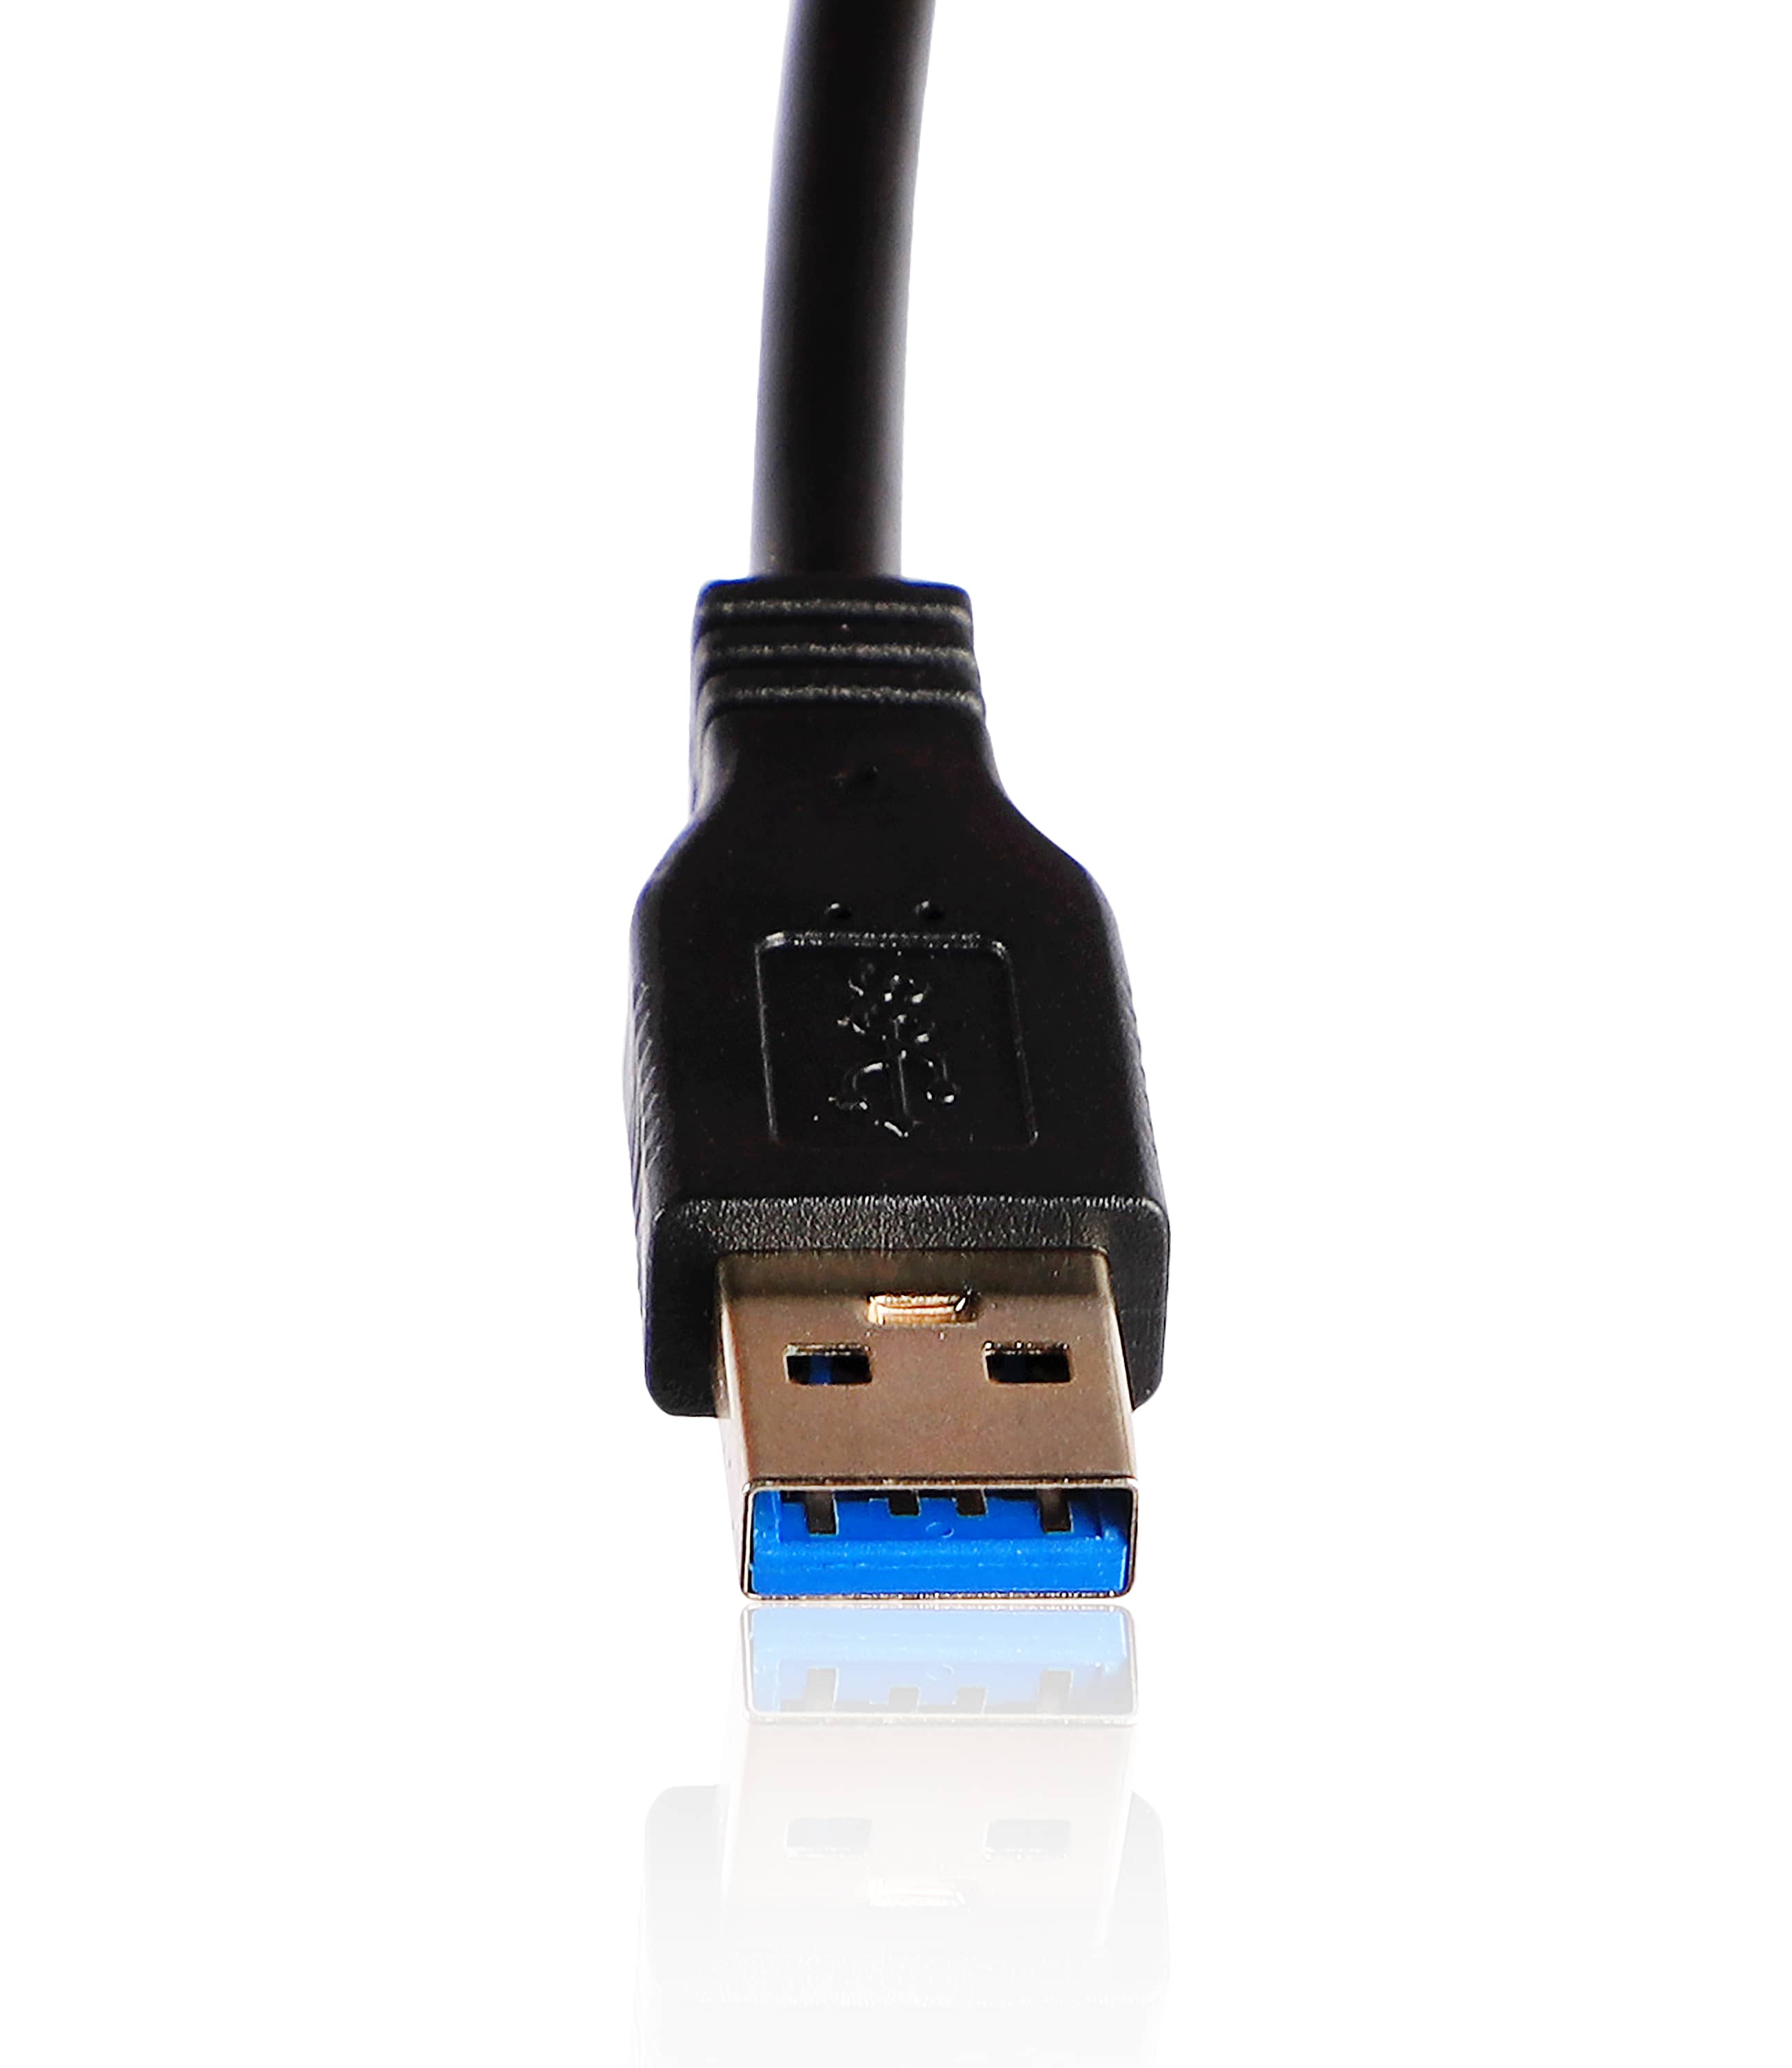 POWERX USB 3.0 A TO HDMI ADAPTER